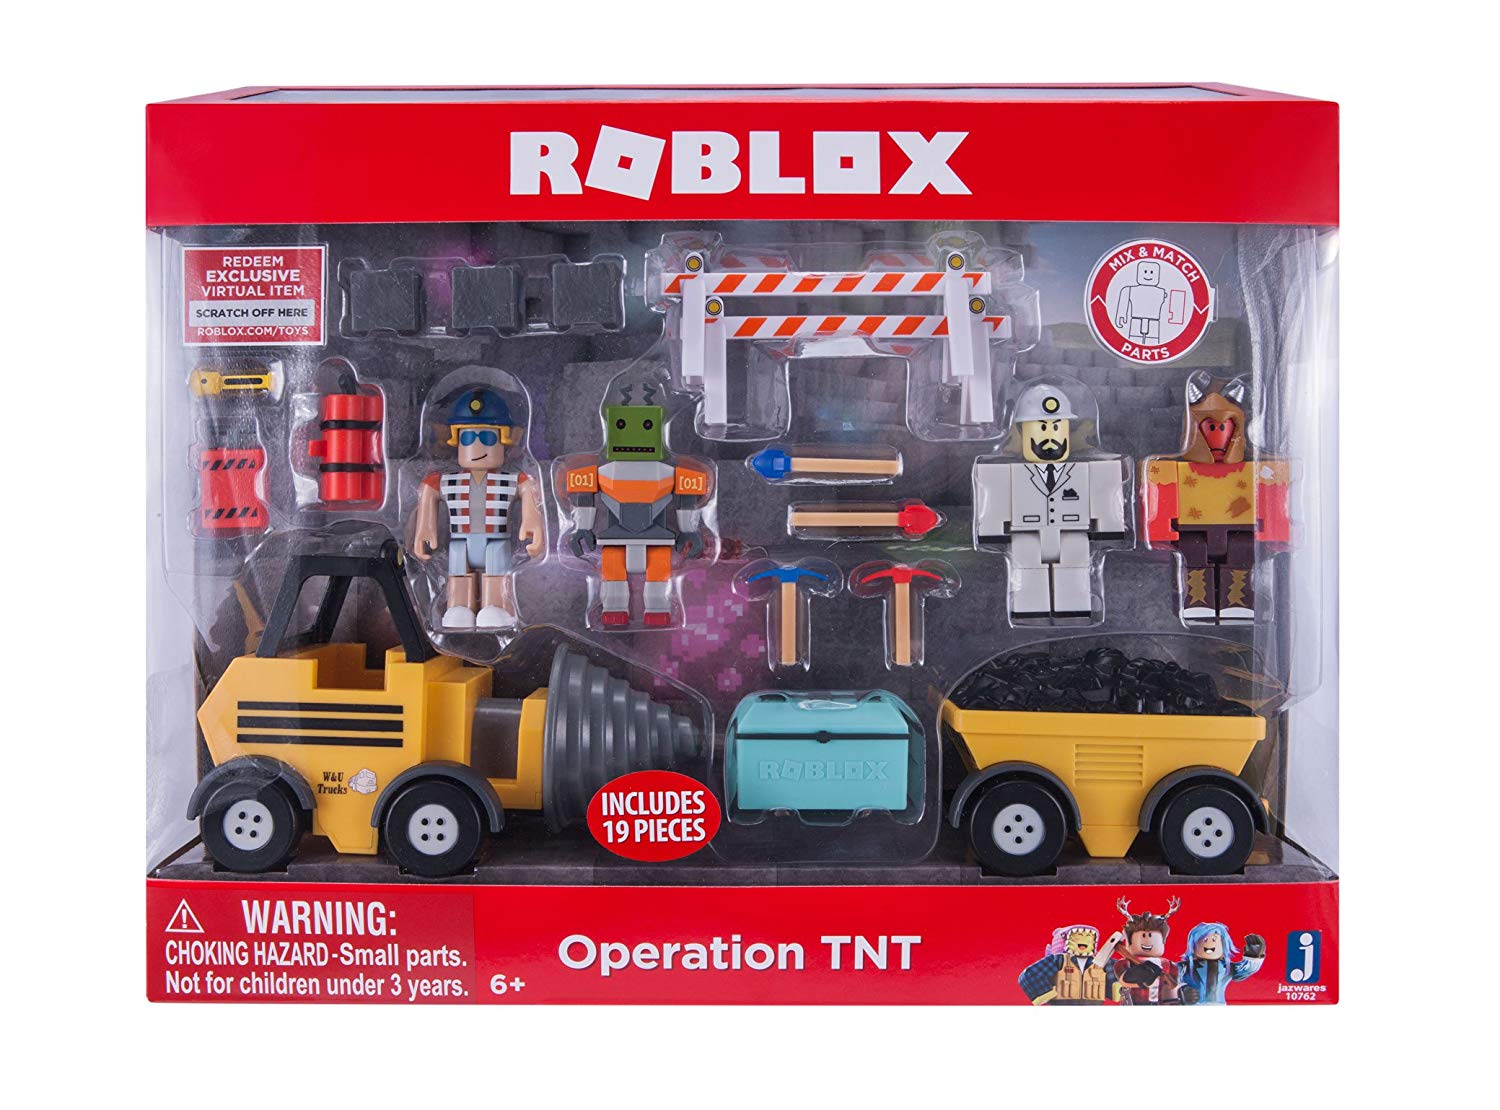 15 Best Roblox Toys The Ultimate List 2021 Heavy Com - the roblox toy